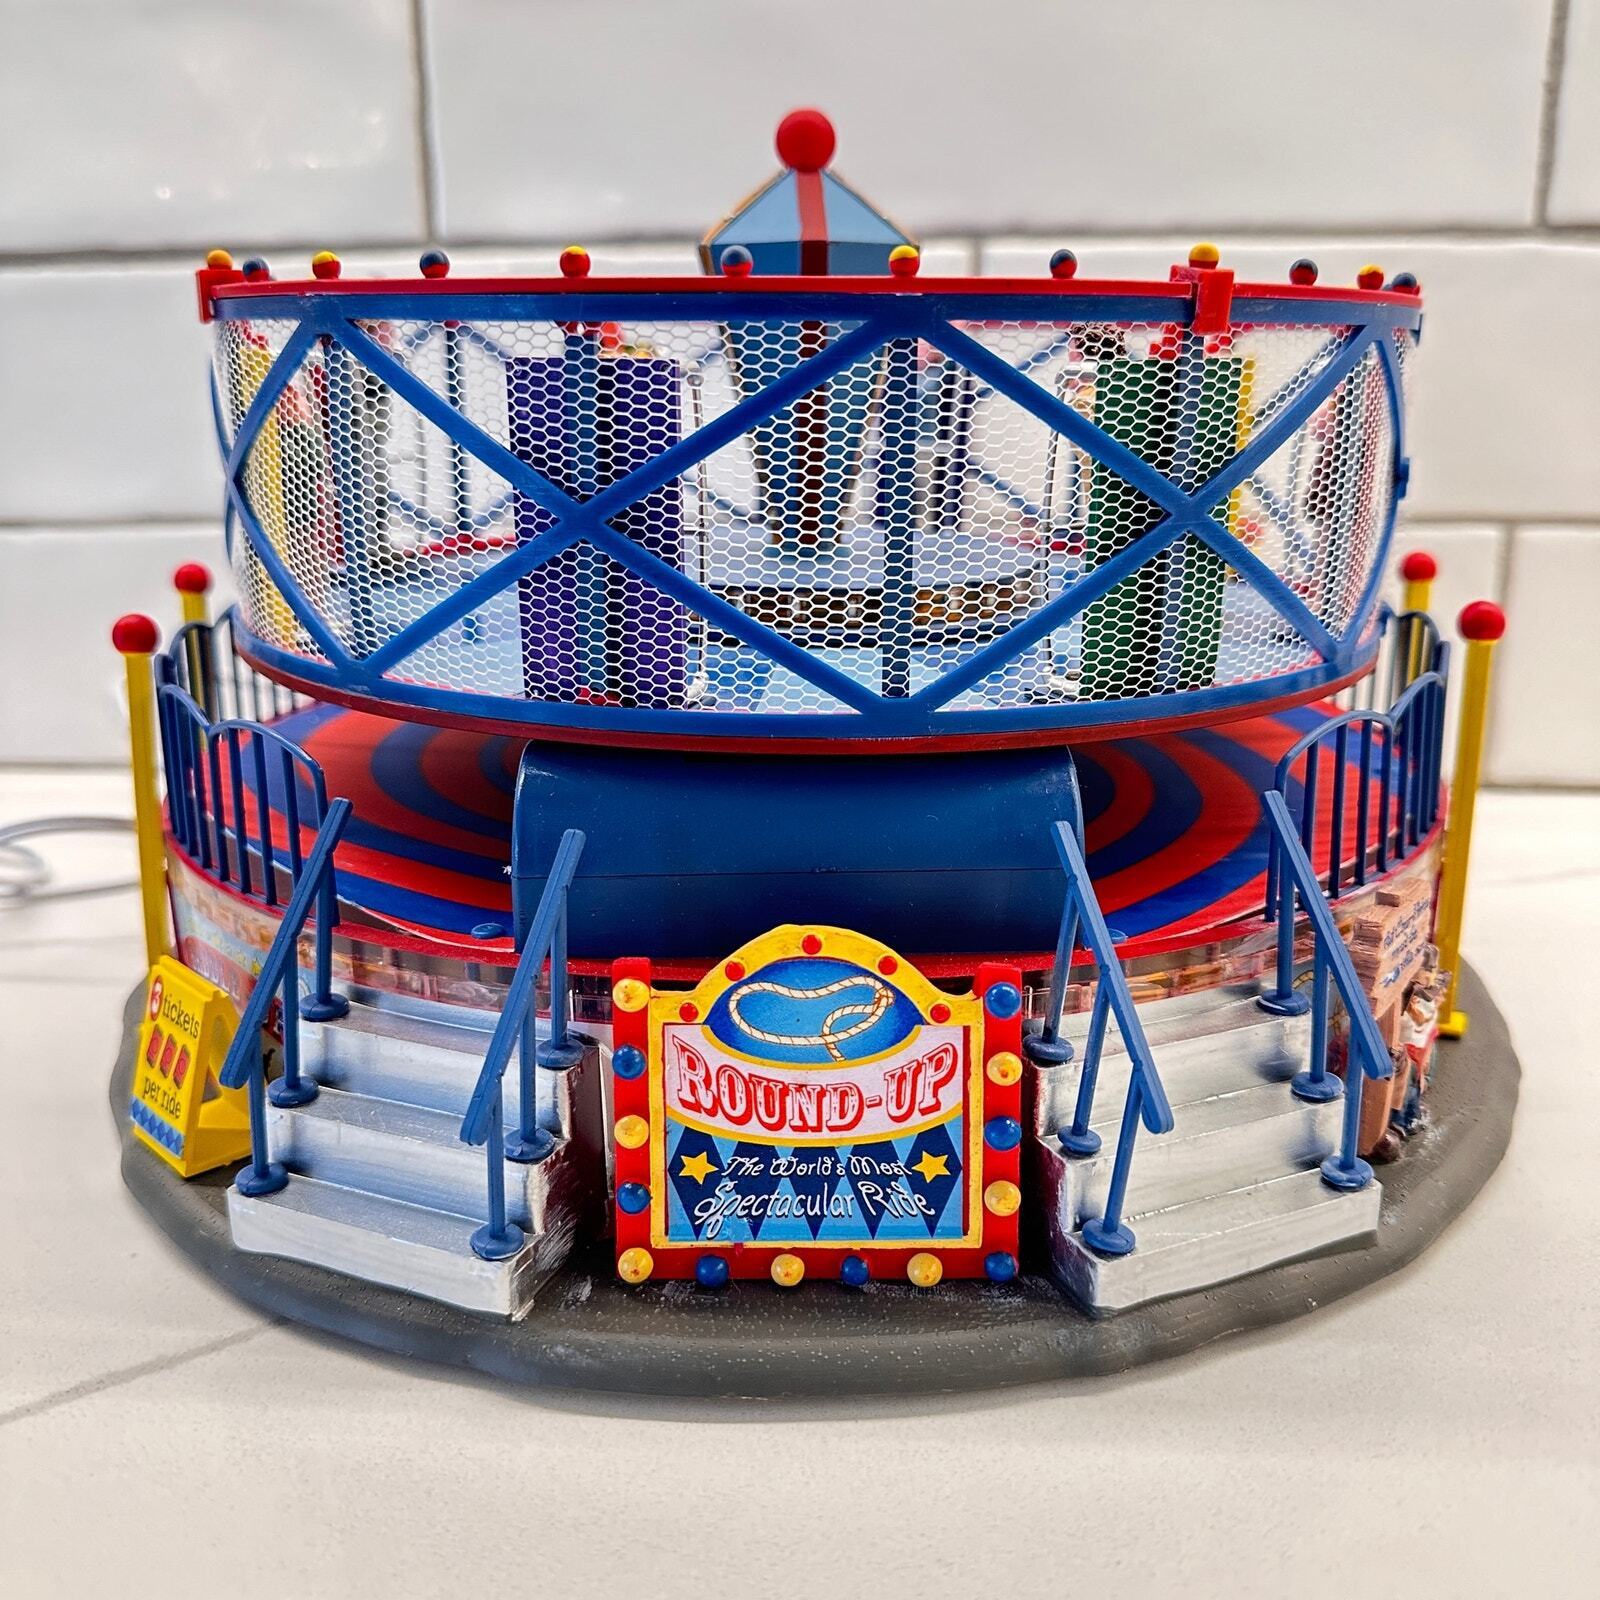 Lemax Round Up Holiday Village Carnival Midway Ride Animated Lights Sound #24483